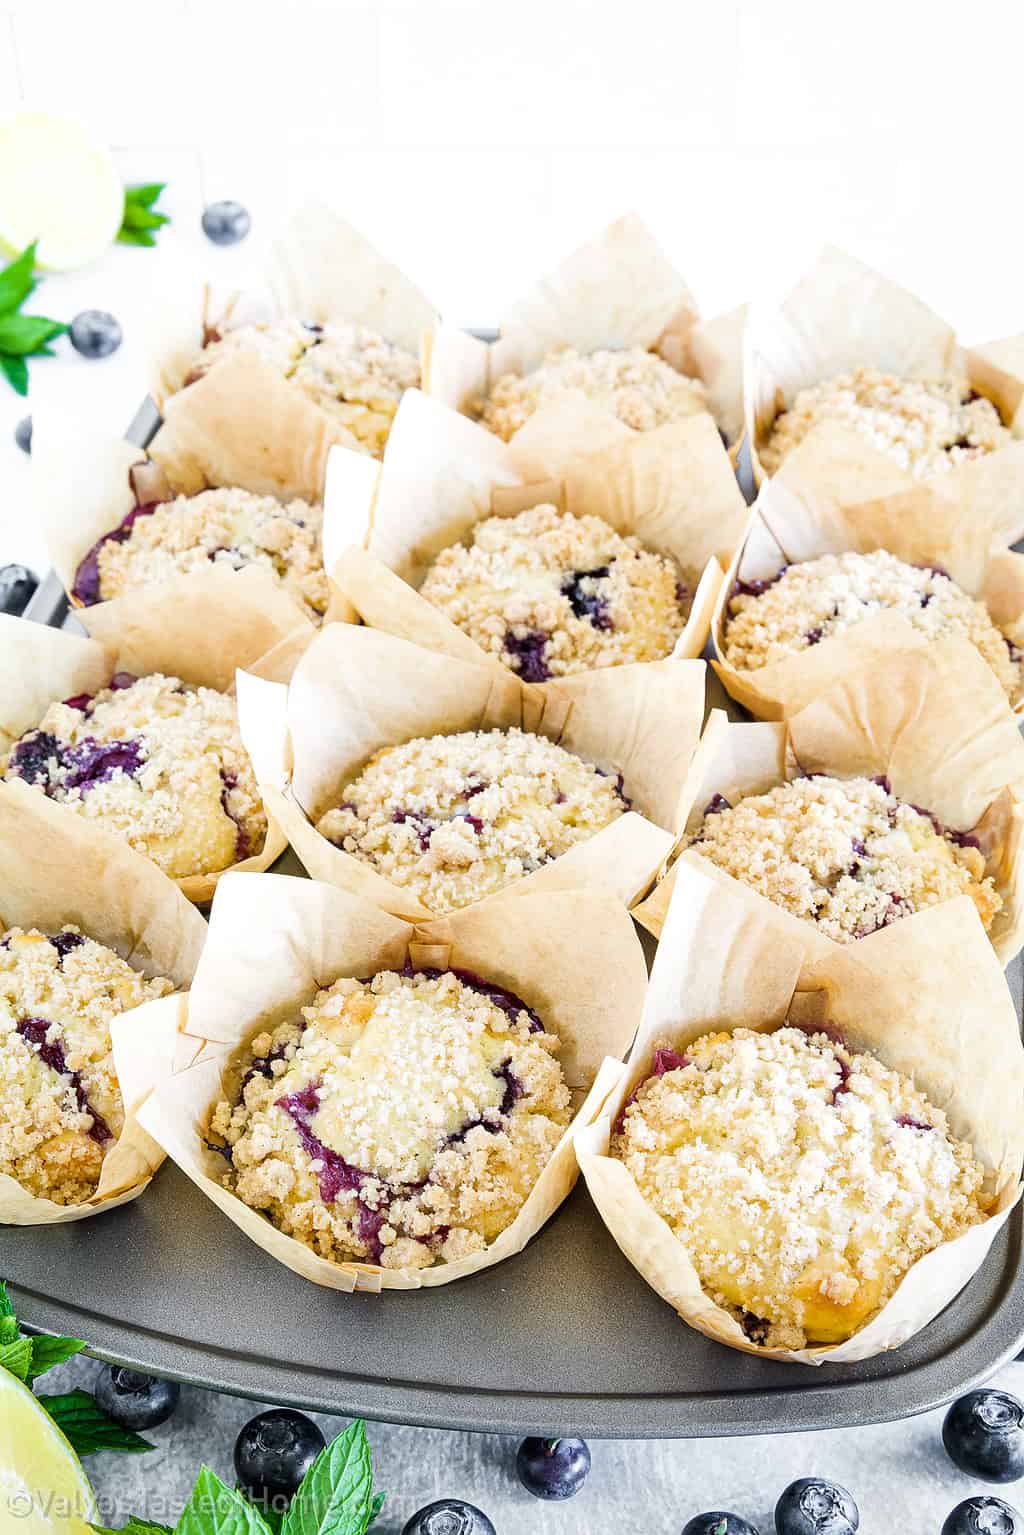 Classic Blueberry Muffins (With Homemade Streusel Topping)